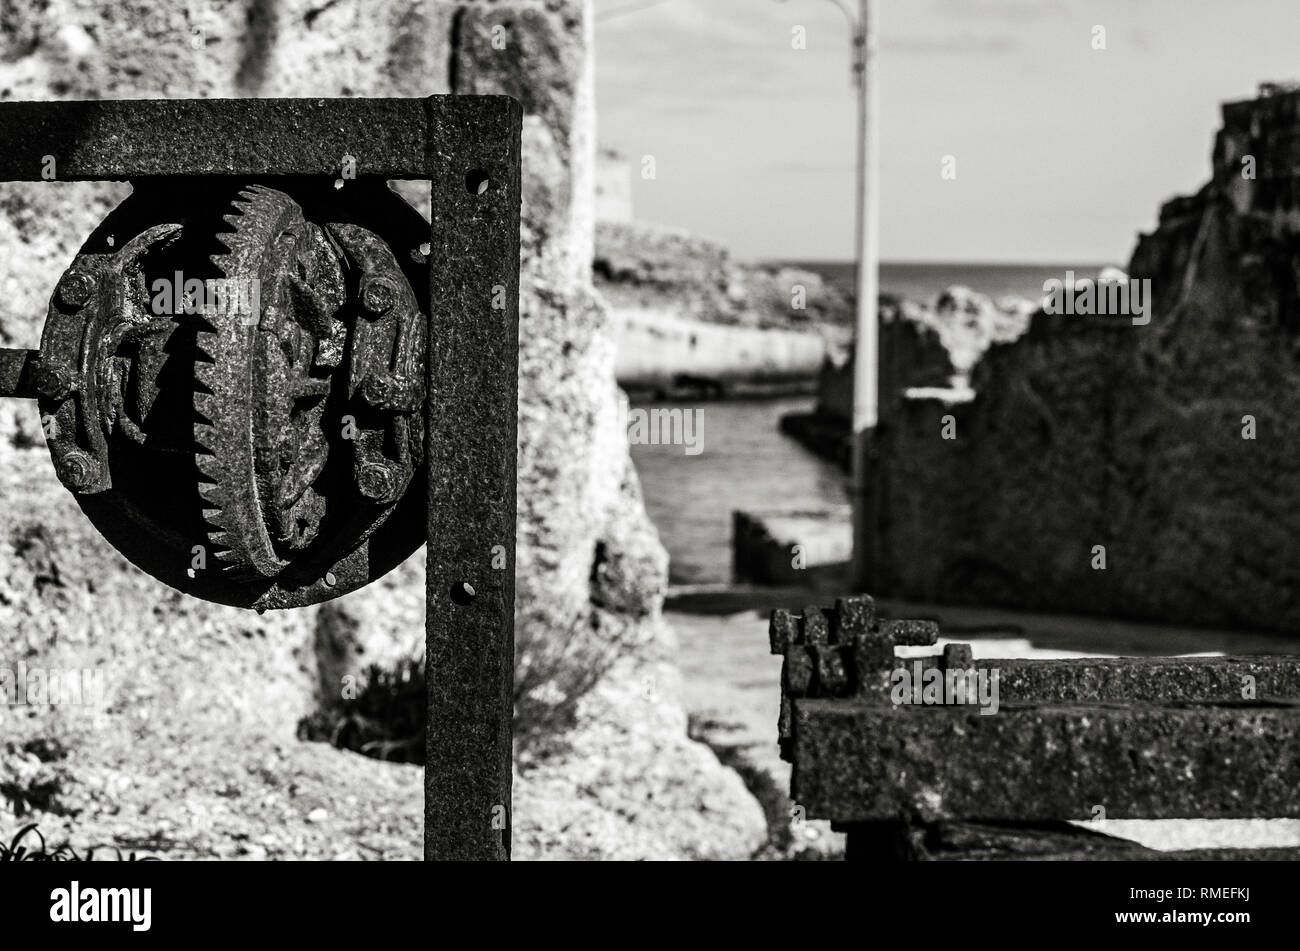 detail of an old rusty device along the sea in bw Stock Photo